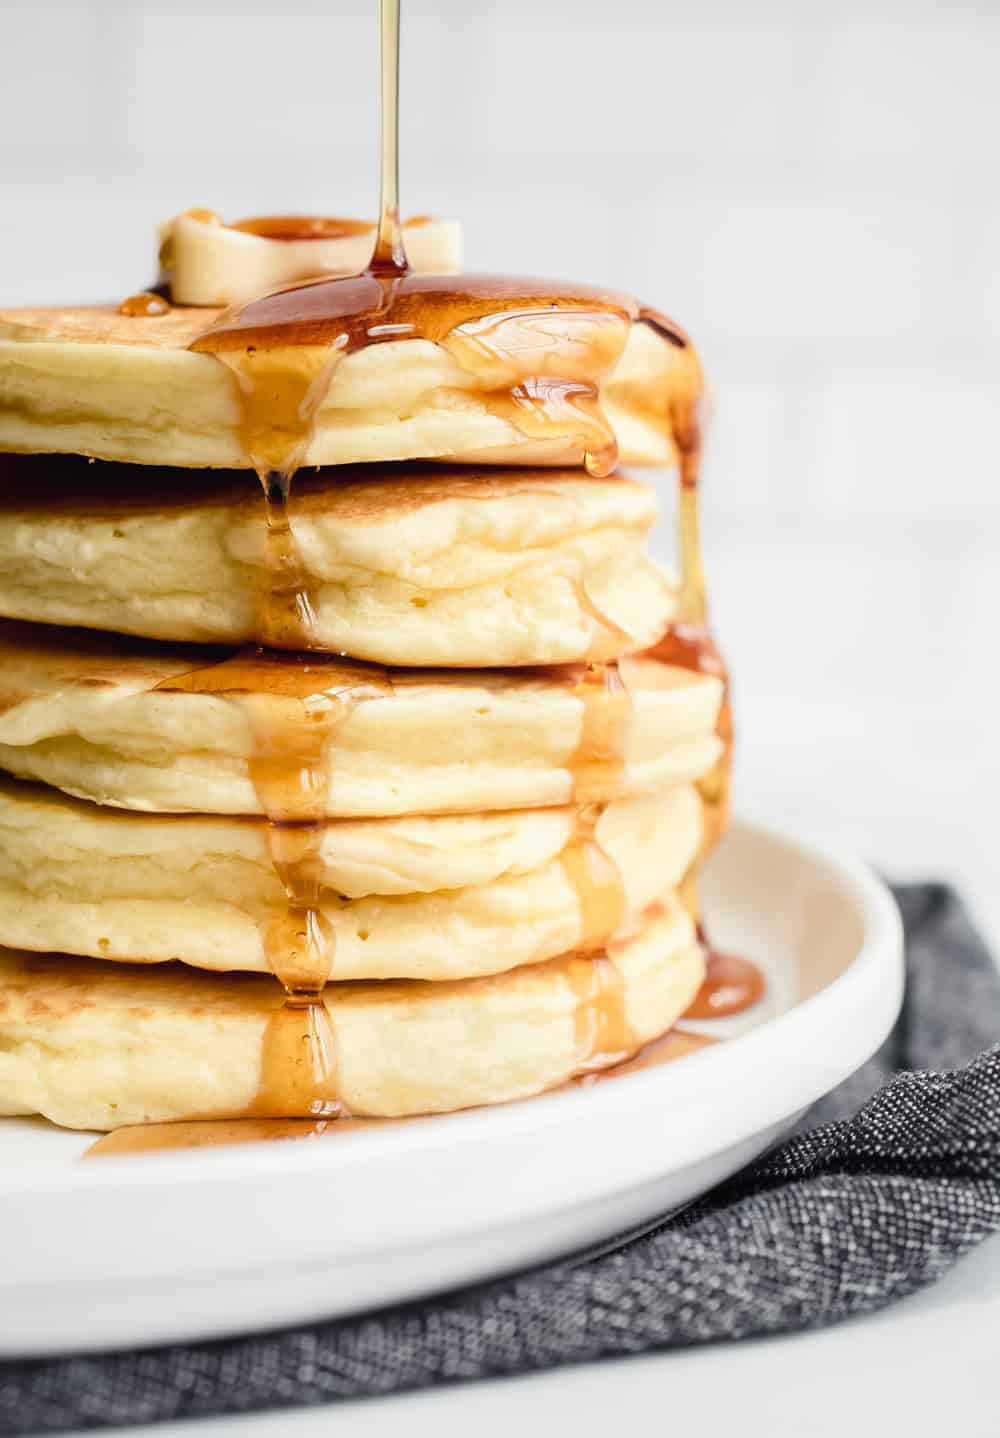 Syrup being drizzled over a stack of fluffy Bisquick pancakes on a white plate